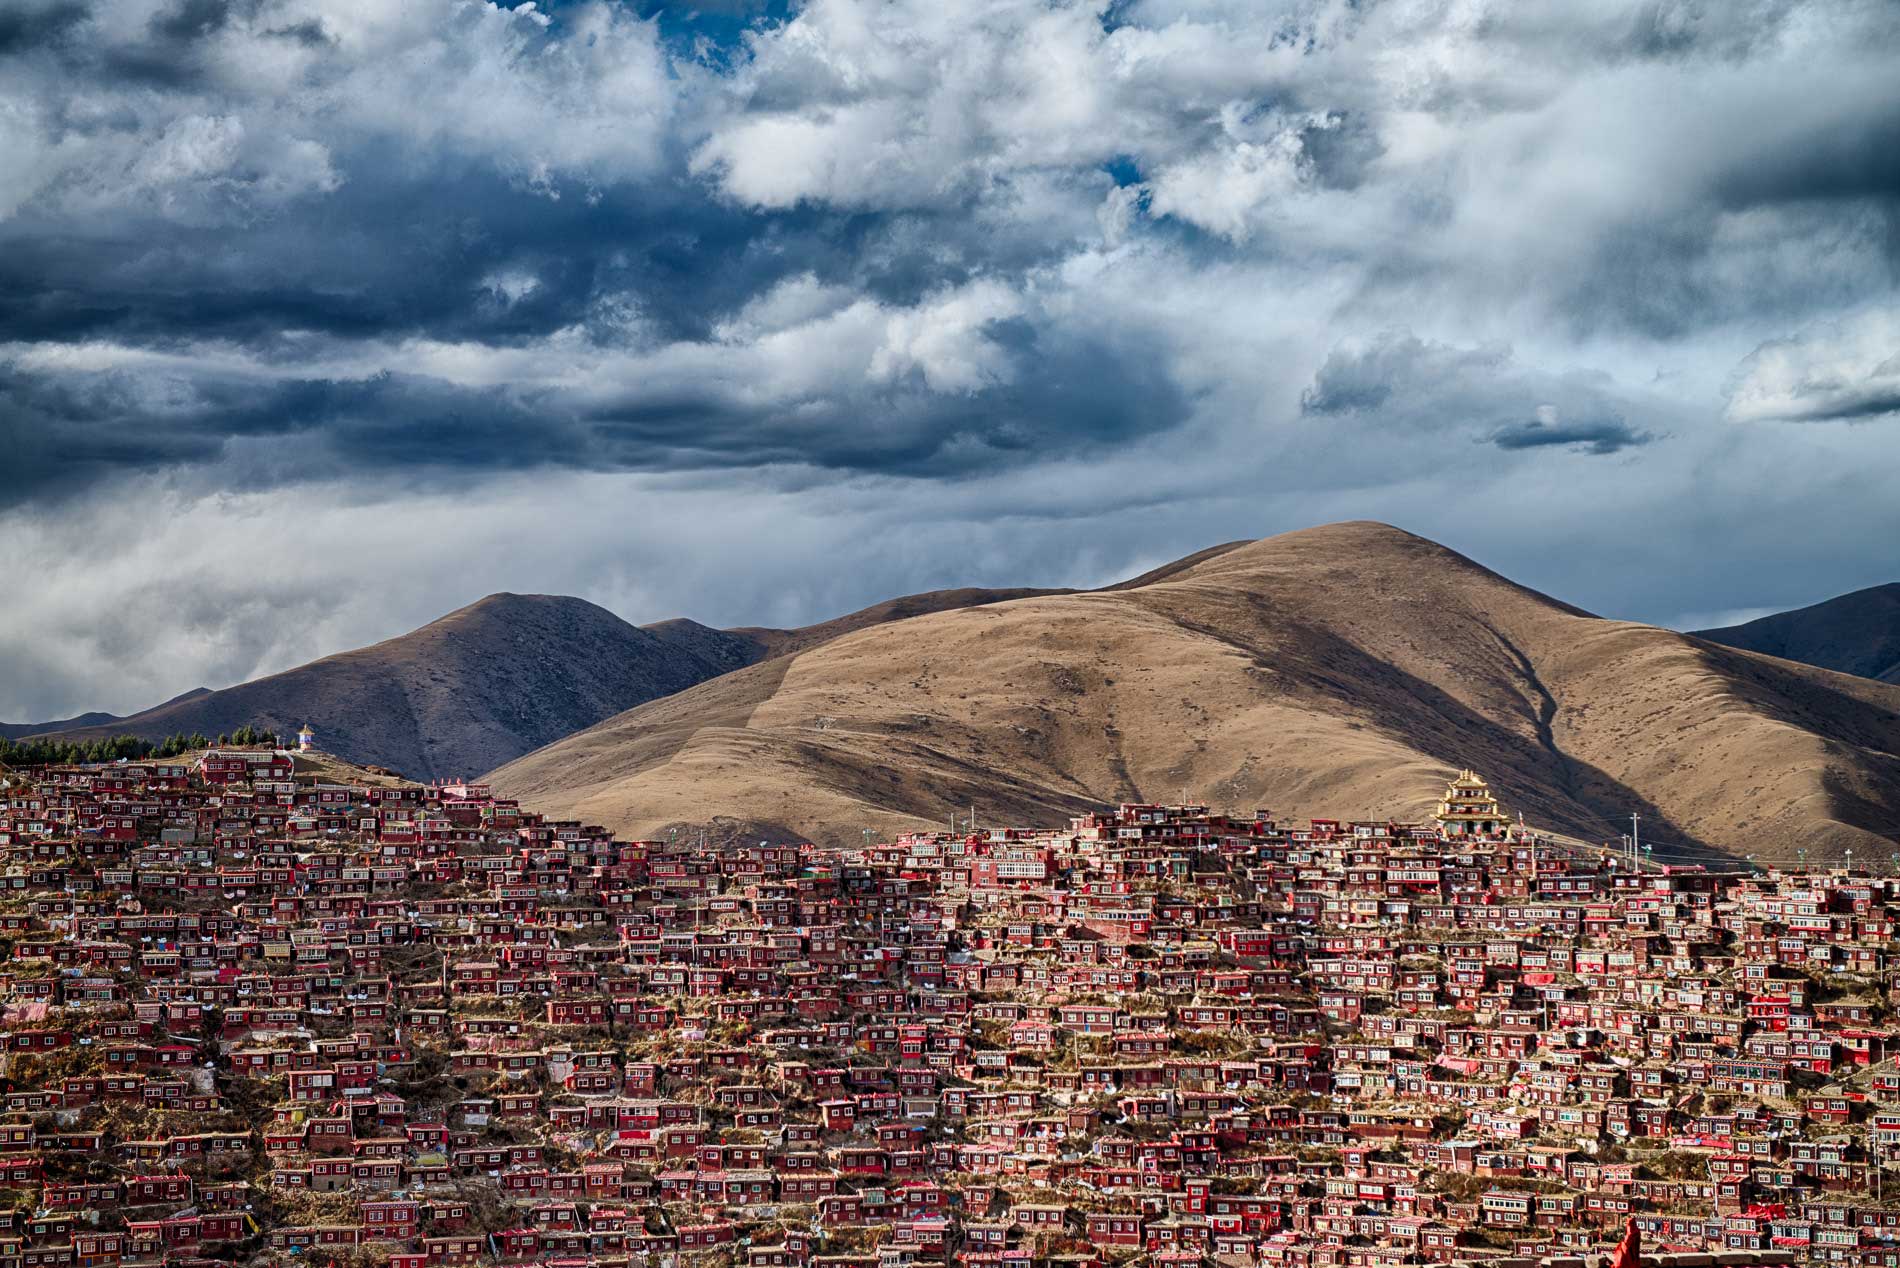 Home of 40 thousand Buddhist monks in China's Sichuan Province.